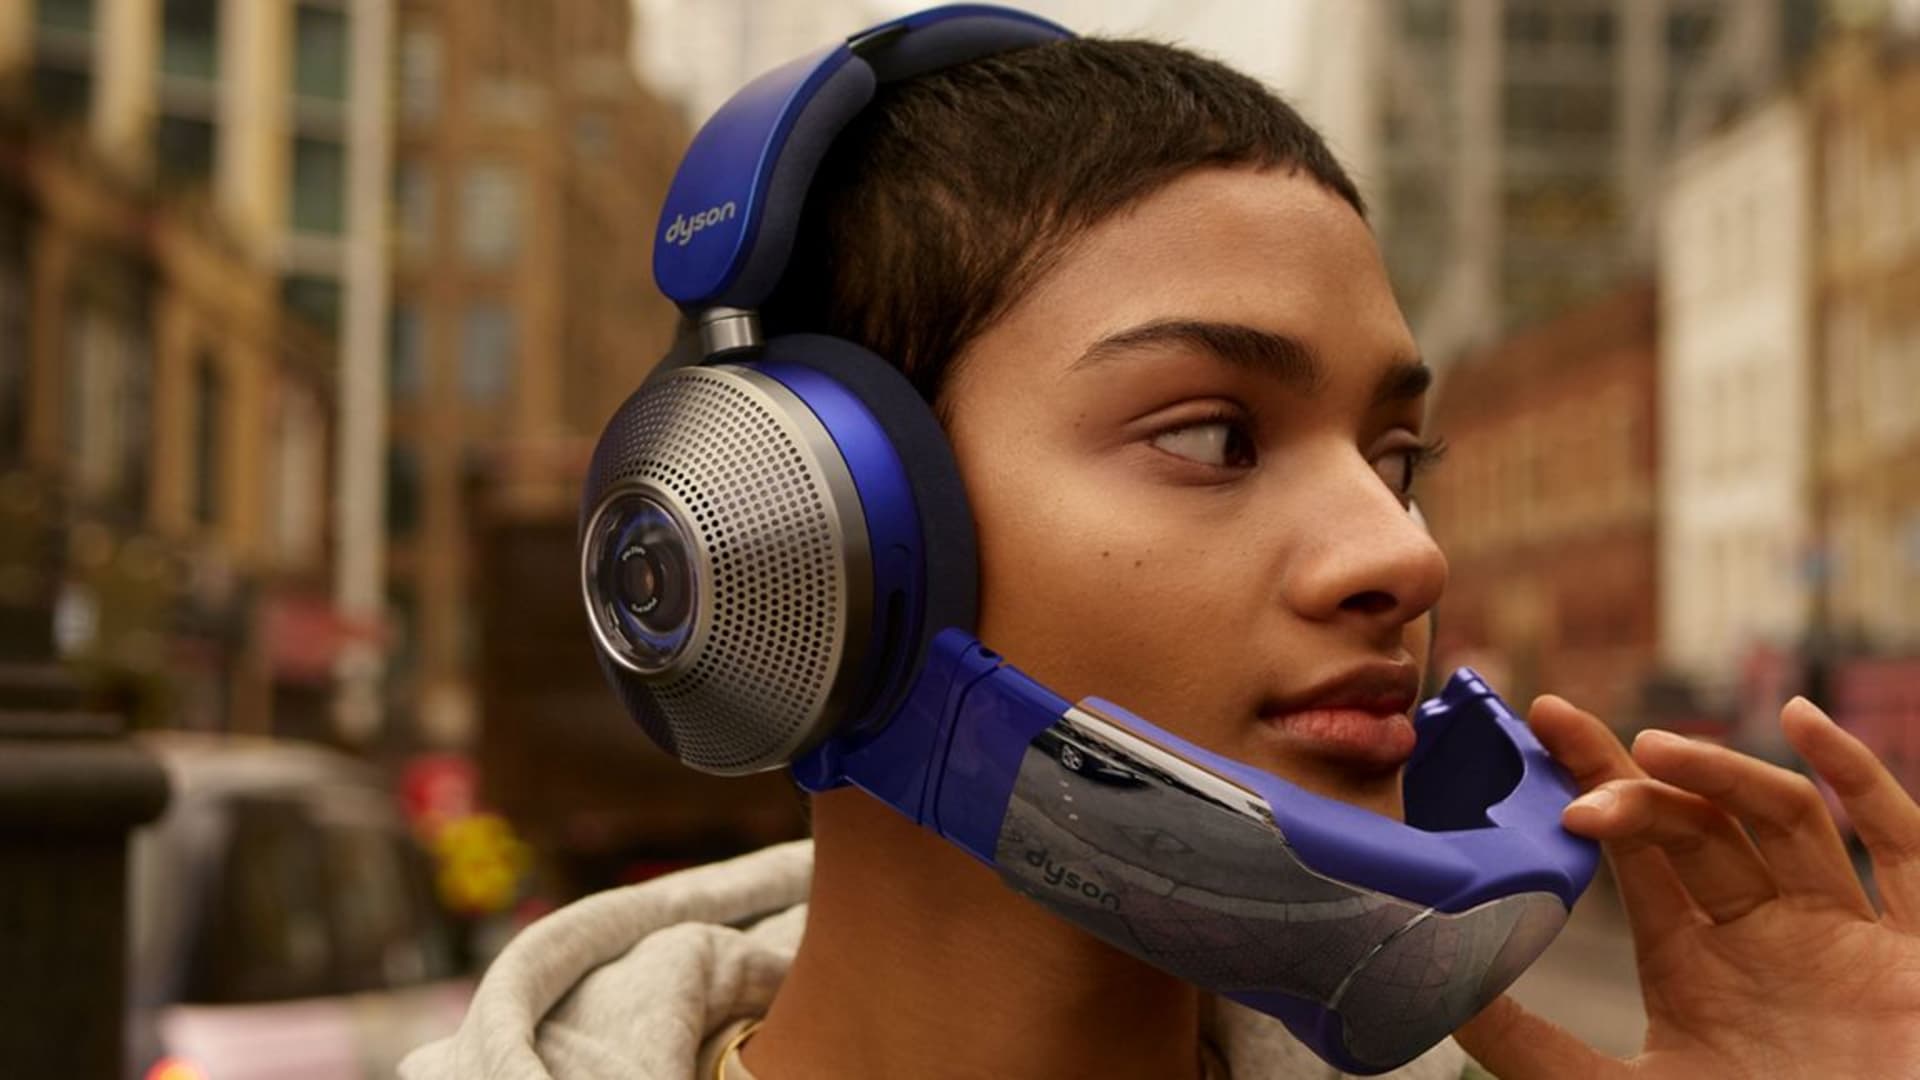 This year's Grammy gift bag will include a pair of Dyson noise cancelling headphone with an air purifier attachment.